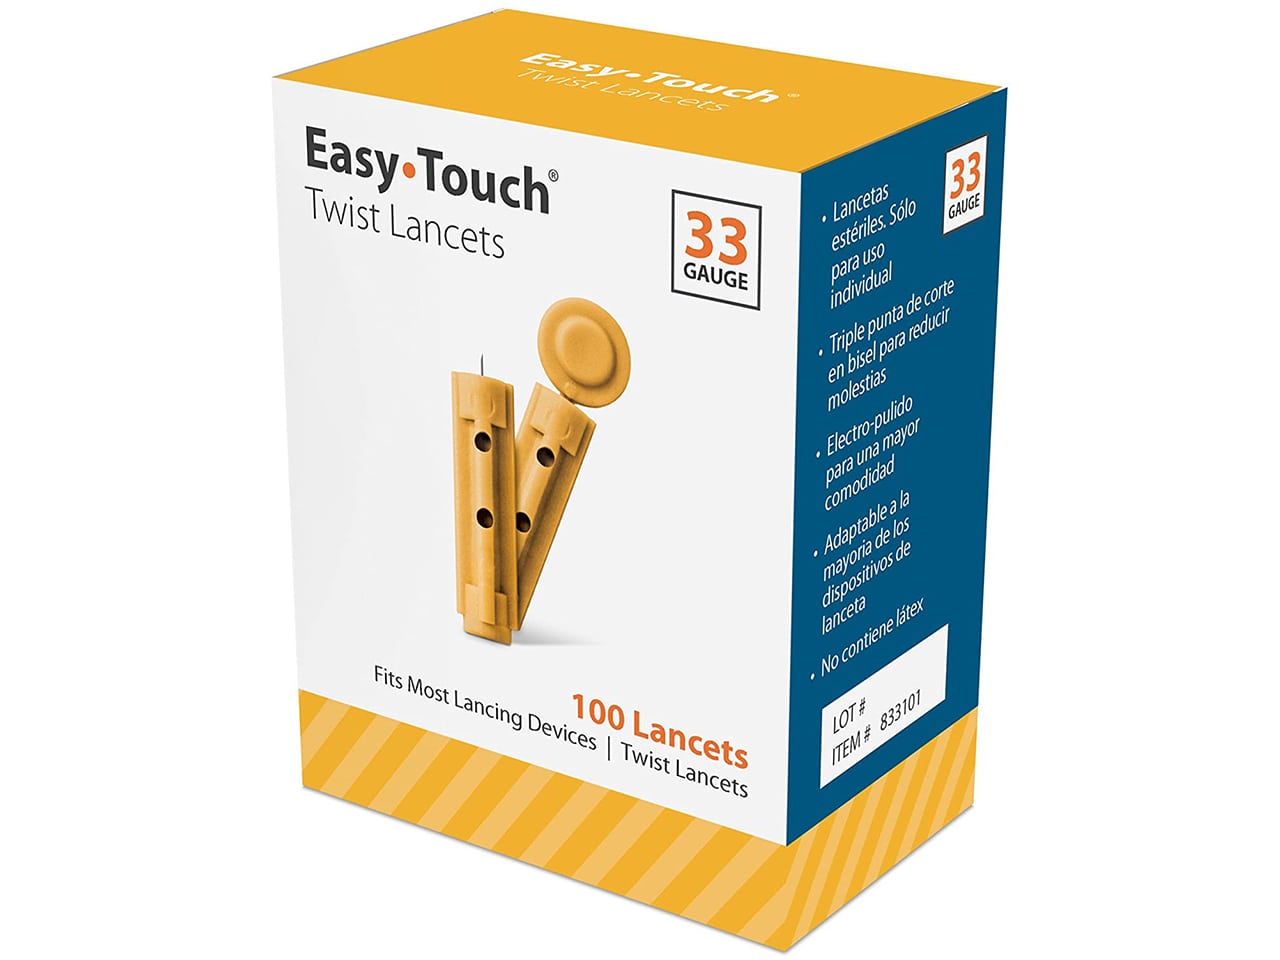 Easy Touch. Easy товар. Универсальное крепление easy-Touch. Easy Touch Syringes. Easy twist